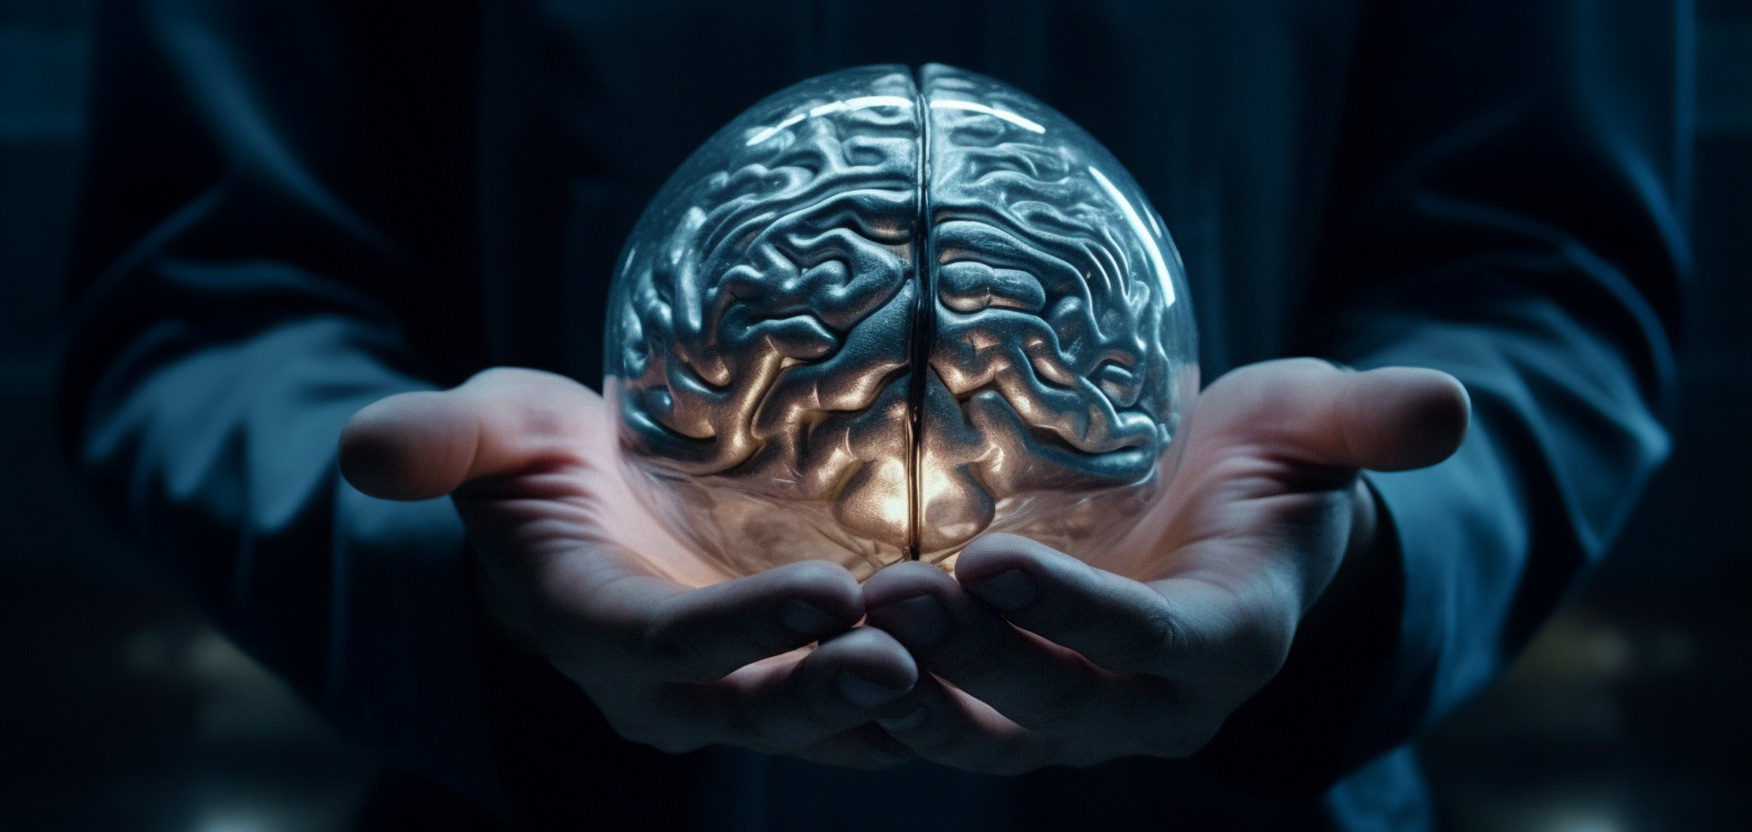 A metallic brain rests in an individual’s cupped hands, representing the concept of artificial intelligence resting in the palms of our hands